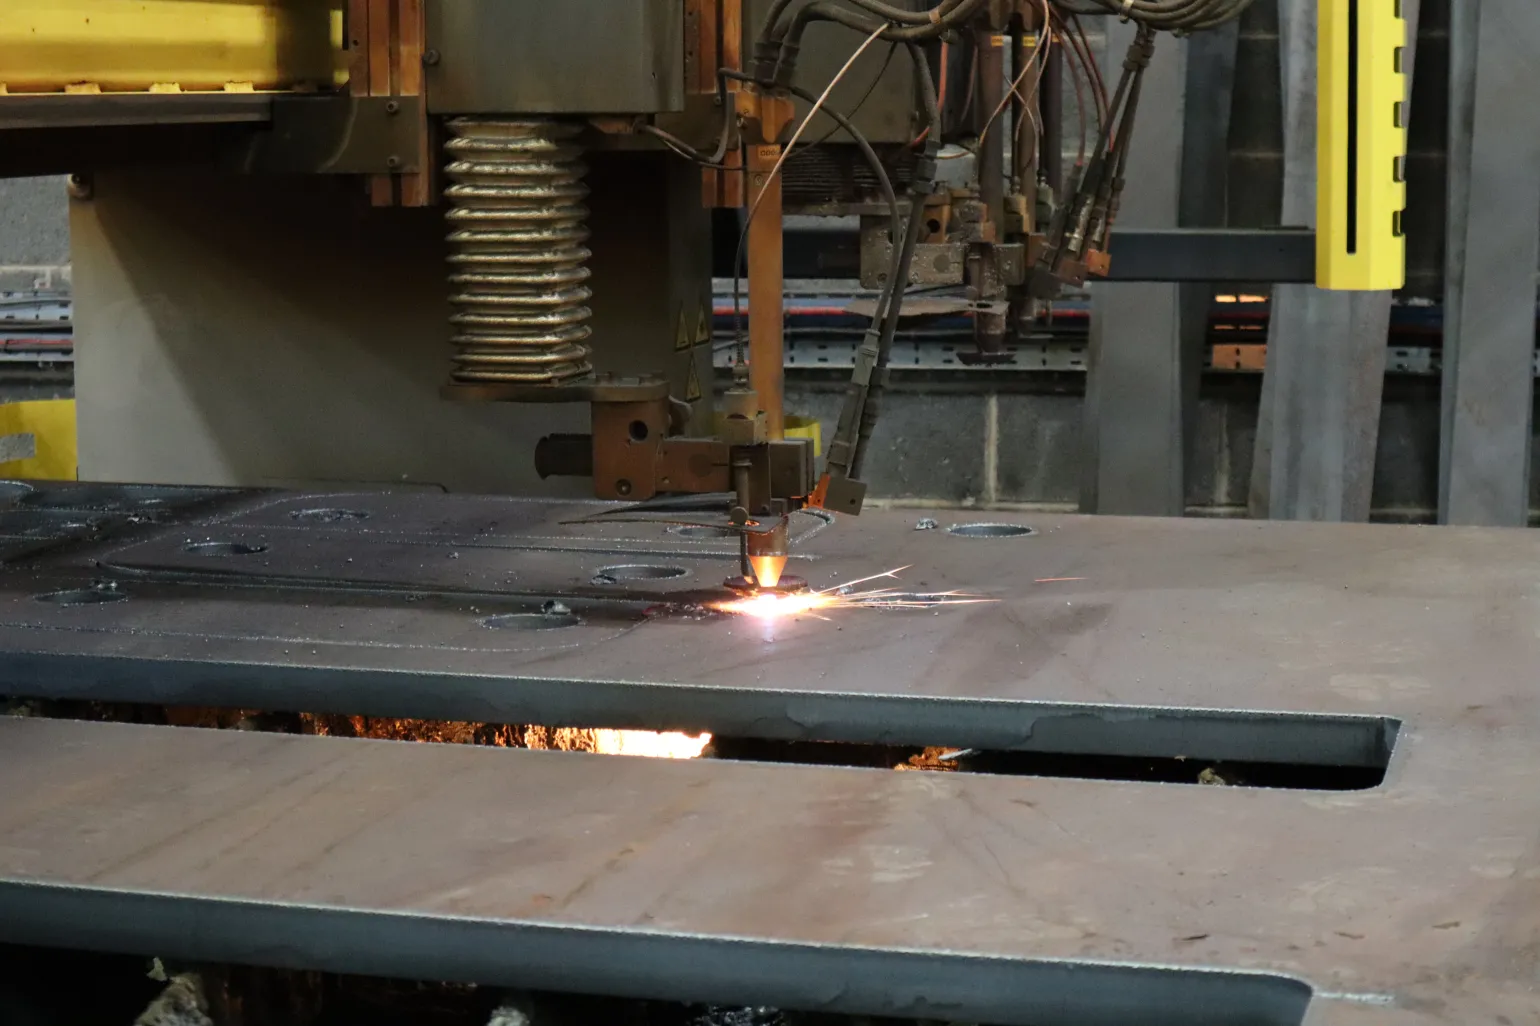 If you need to produce semi-finished or finished parts or products from profiled or cut-to-length high-quality steel, steel machining is the answer. Our machining shop here at Pulman Steel offers steel cutting services as well as profiling and machining services such as chamfering, drilling, and milling. Take a closer look at how our highly skilled mechanists and their computer-guided, specialised machines and tools can help you.
